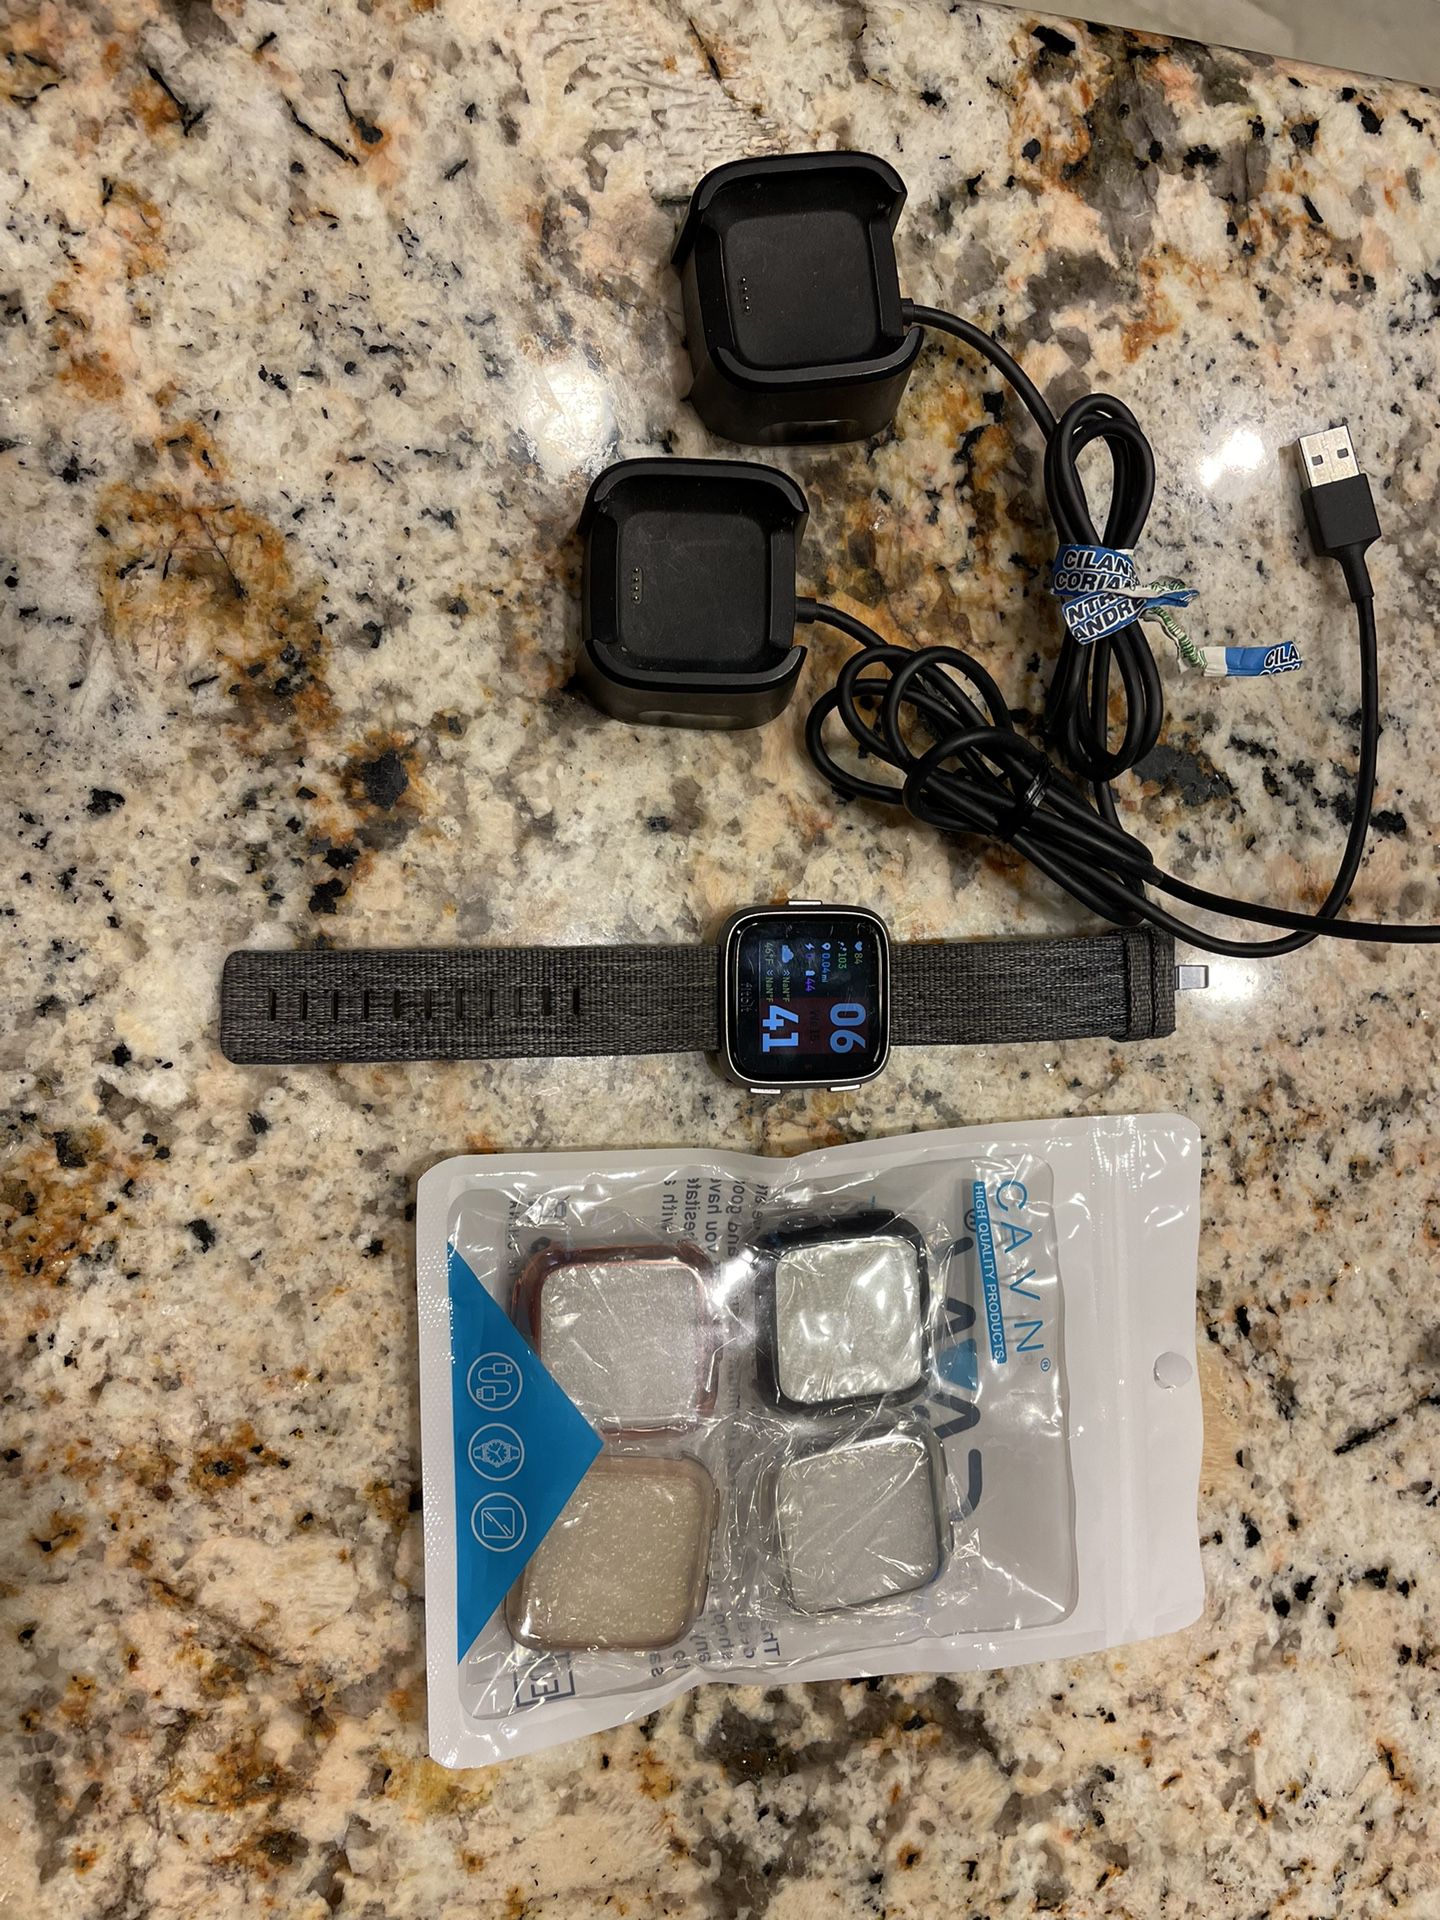 Like new - Fitbit Versa Special Edition. Comes with bonus screen protectors/watch faces plus 2 chargers. Works great. 